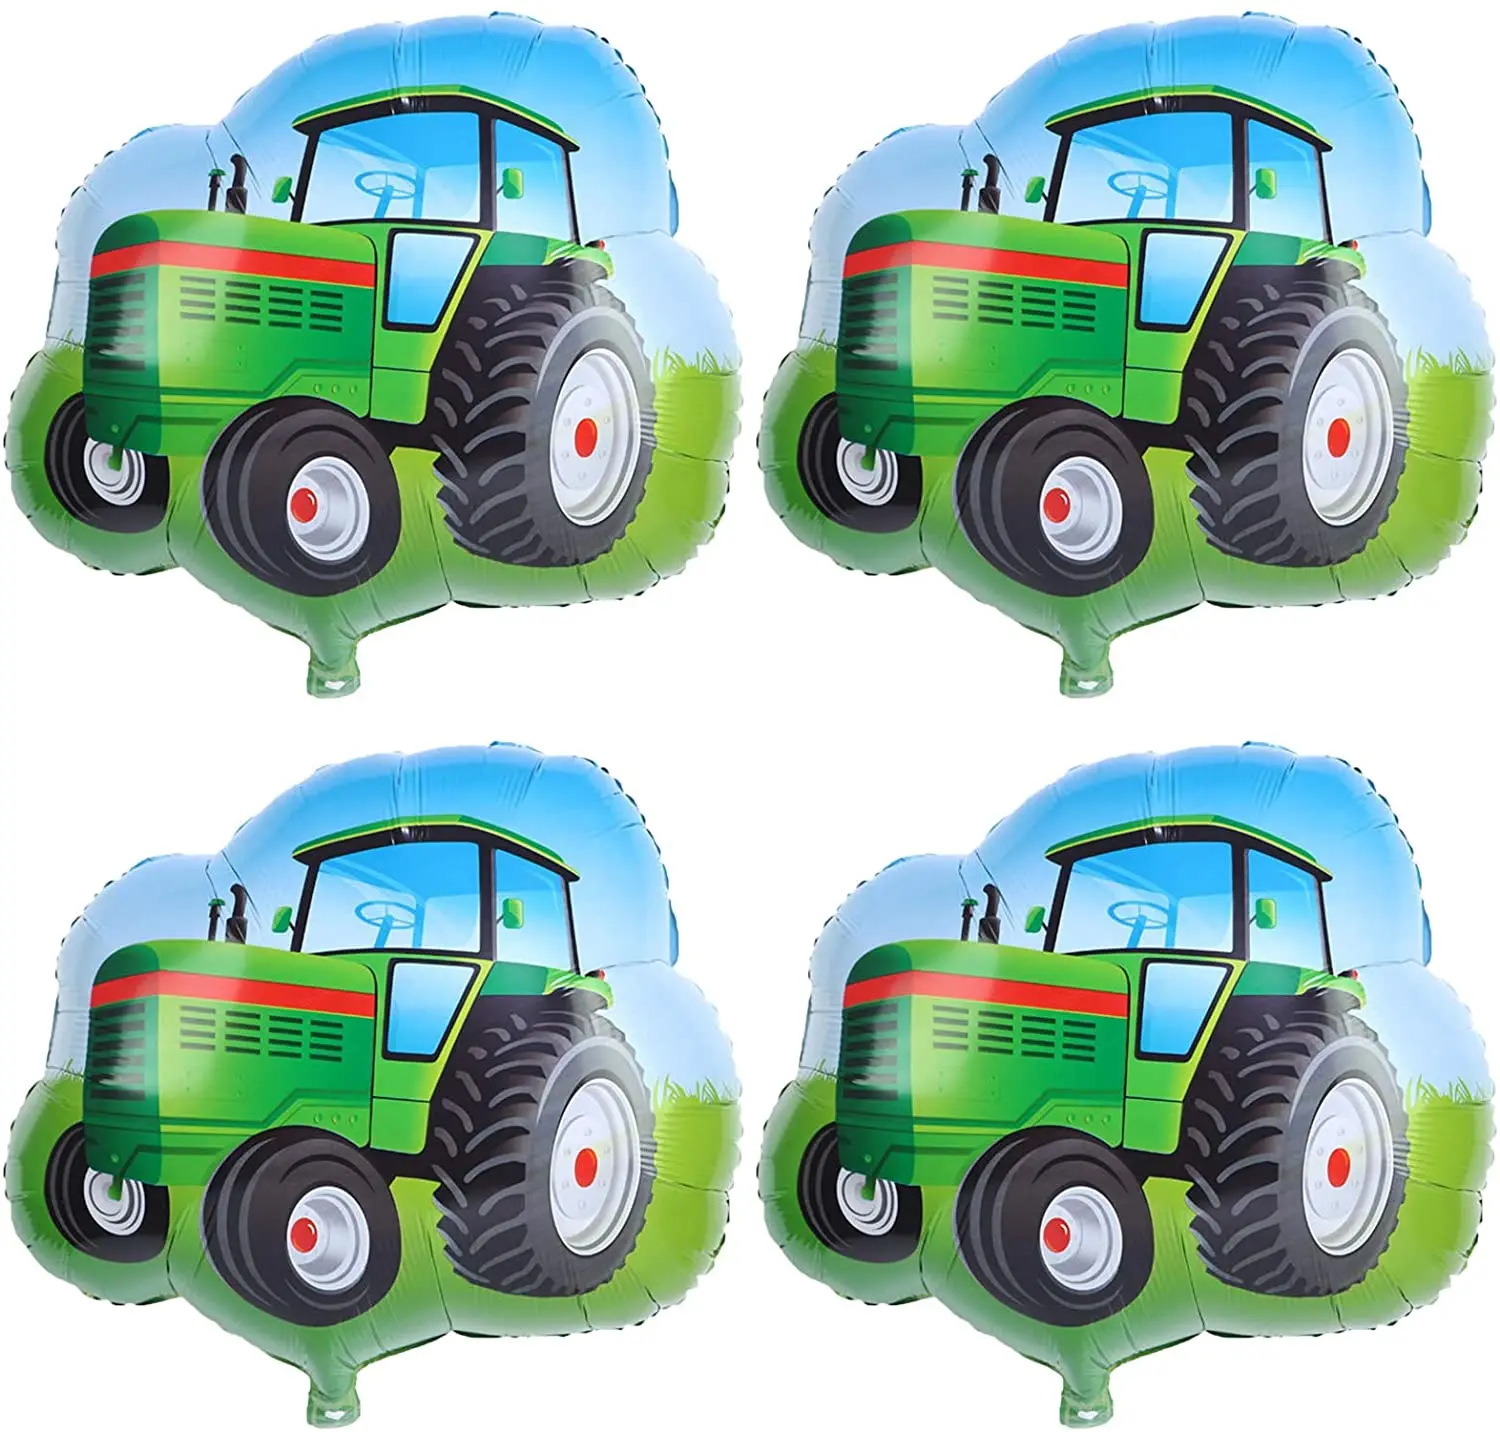 4Pcs/set Giant 25inch Farm Tractor Foil Balloons For Birthday Baby Shower Tractor Themed Party Decorations Supplies